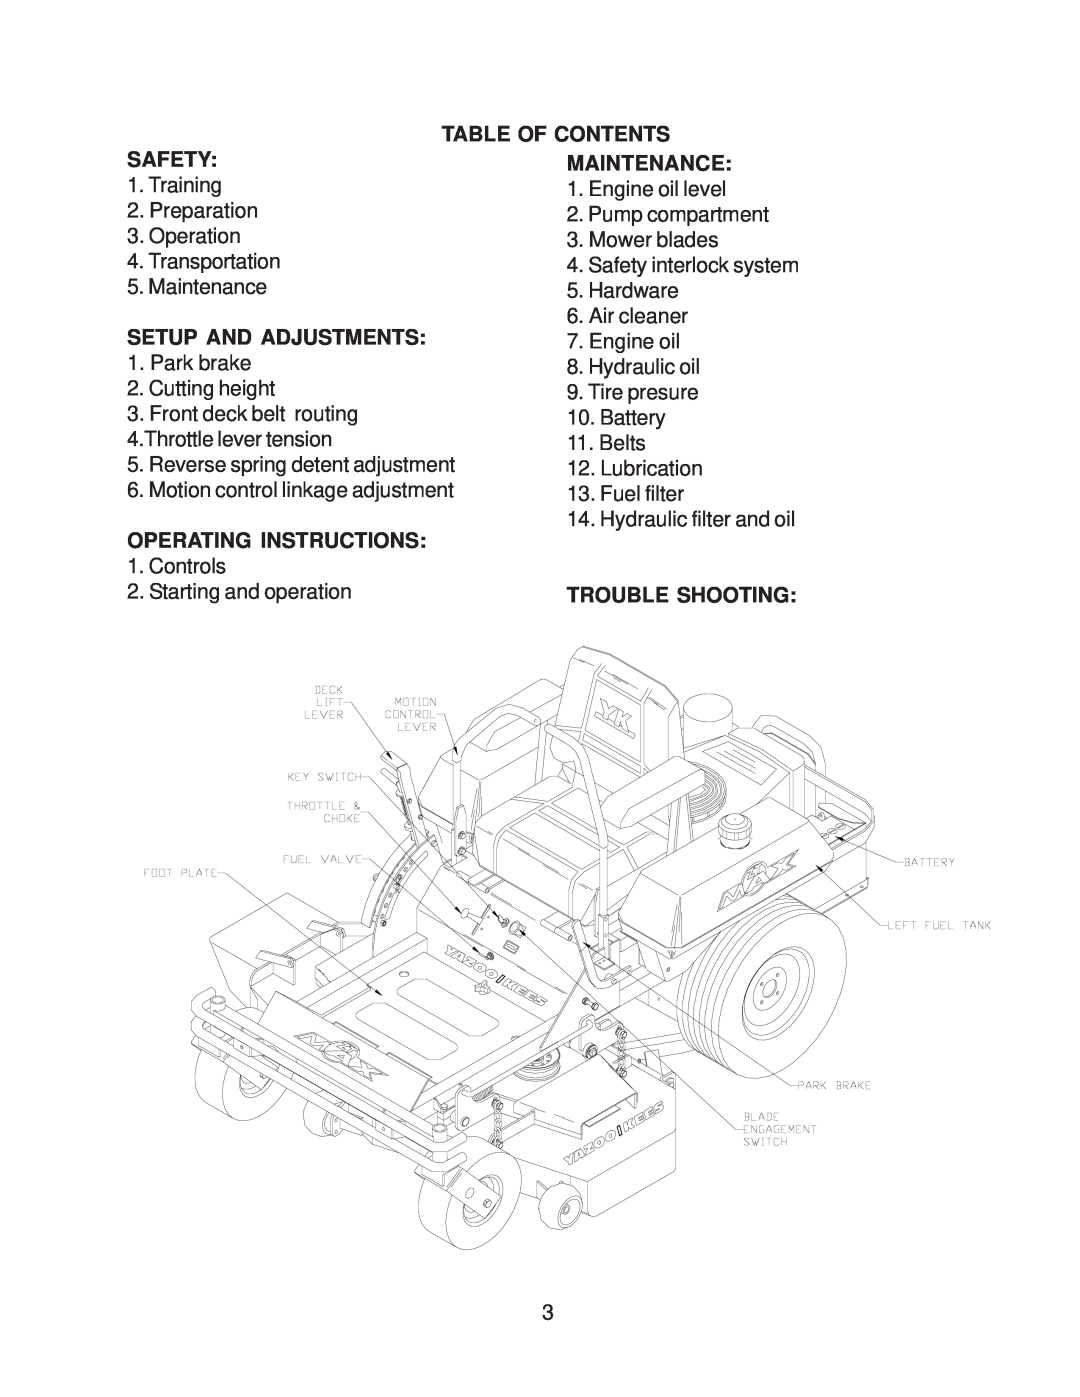 Yazoo/Kees ZKW42170, ZKW48170, ZKW48190 Table Of Contents, Safety, Maintenance, Setup And Adjustments, Trouble Shooting 